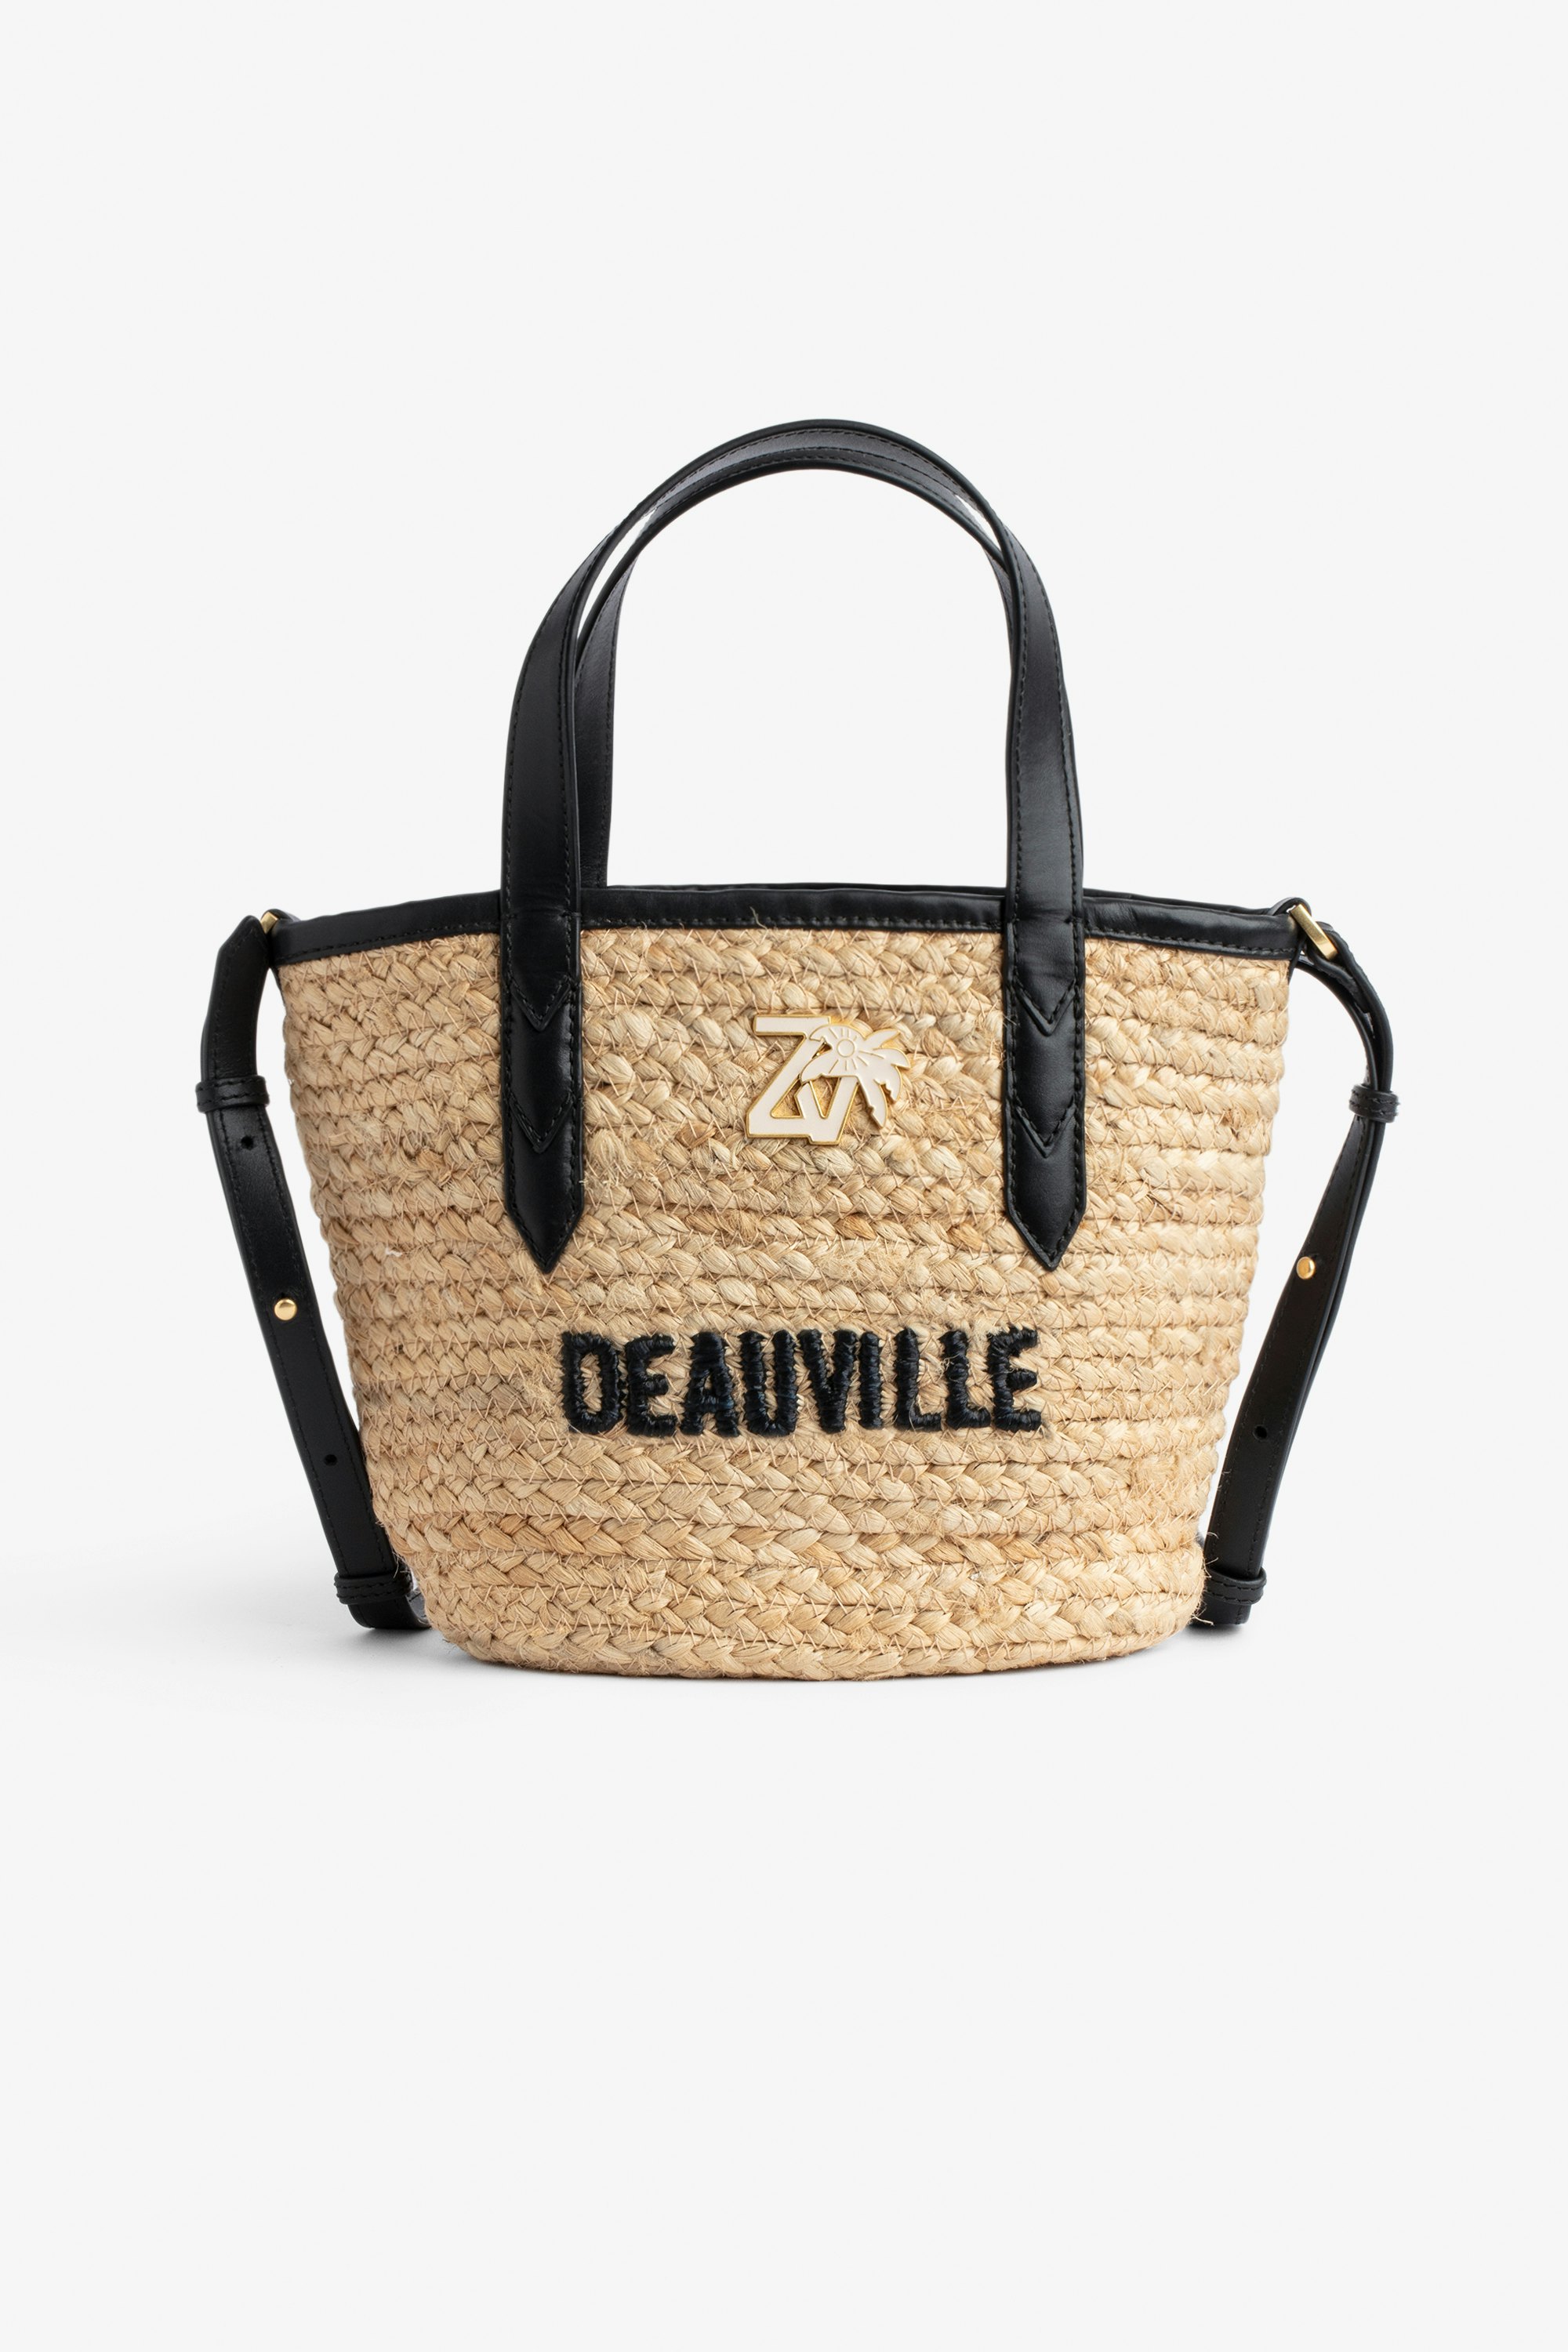 Le Baby Beach Bag Women's straw bag with black leather shoulder strap, "Deauville" embroidery and ZV charm